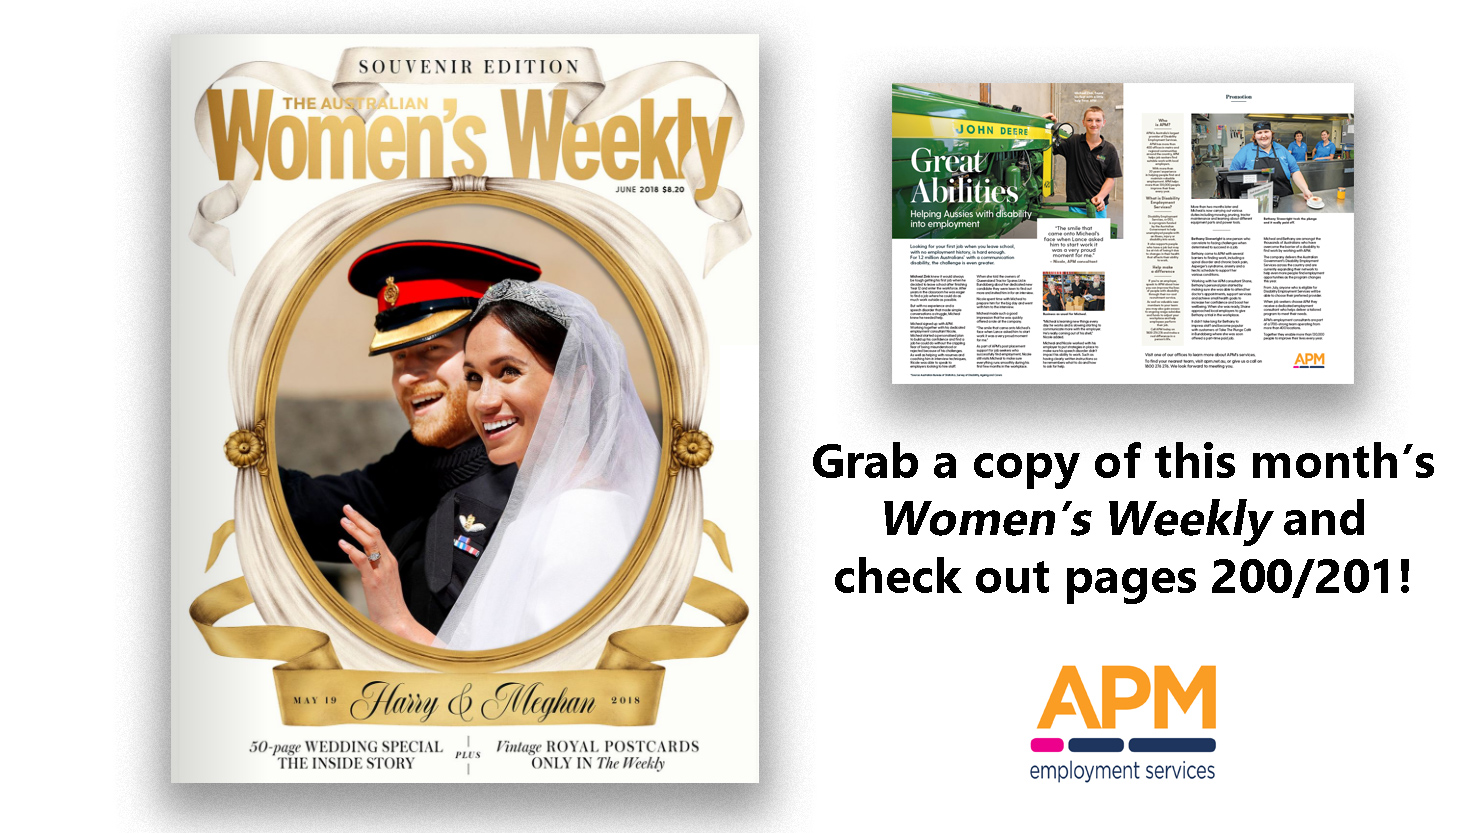 There&#39;s two inspirational stars inside this month&rsquo;s Women&rsquo;s Weekly magazine.